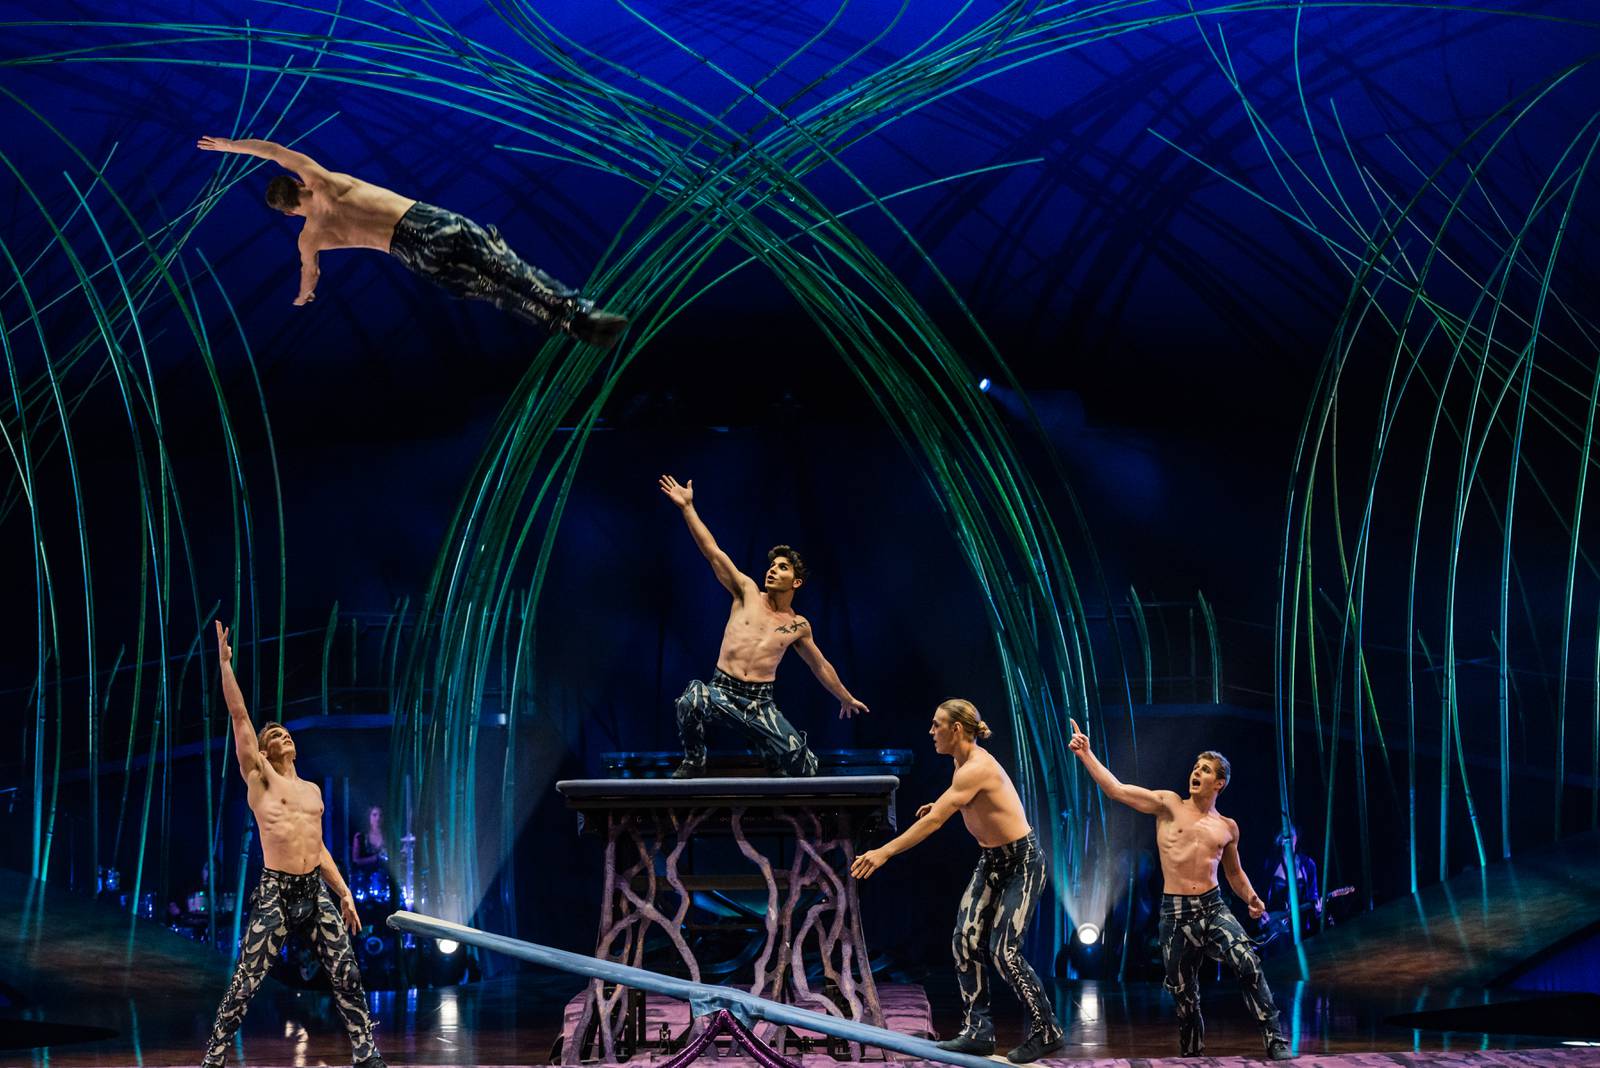 Enjoy front row seat to new Cirque du Soleil show WSBTV Channel 2